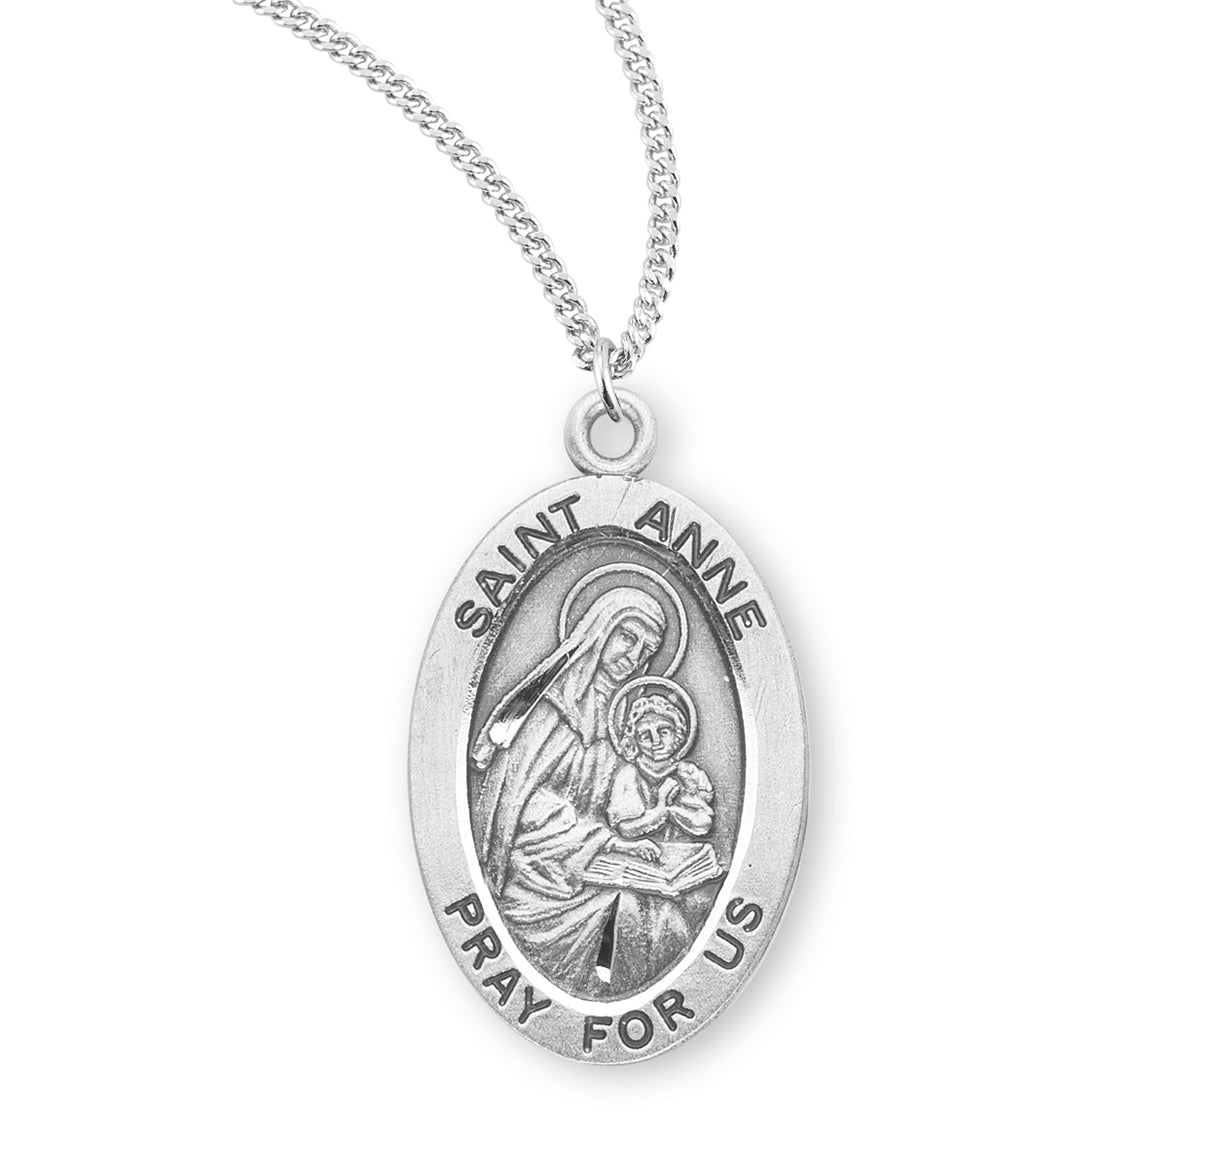 Patron Saint Anne Oval Sterling Silver Medal